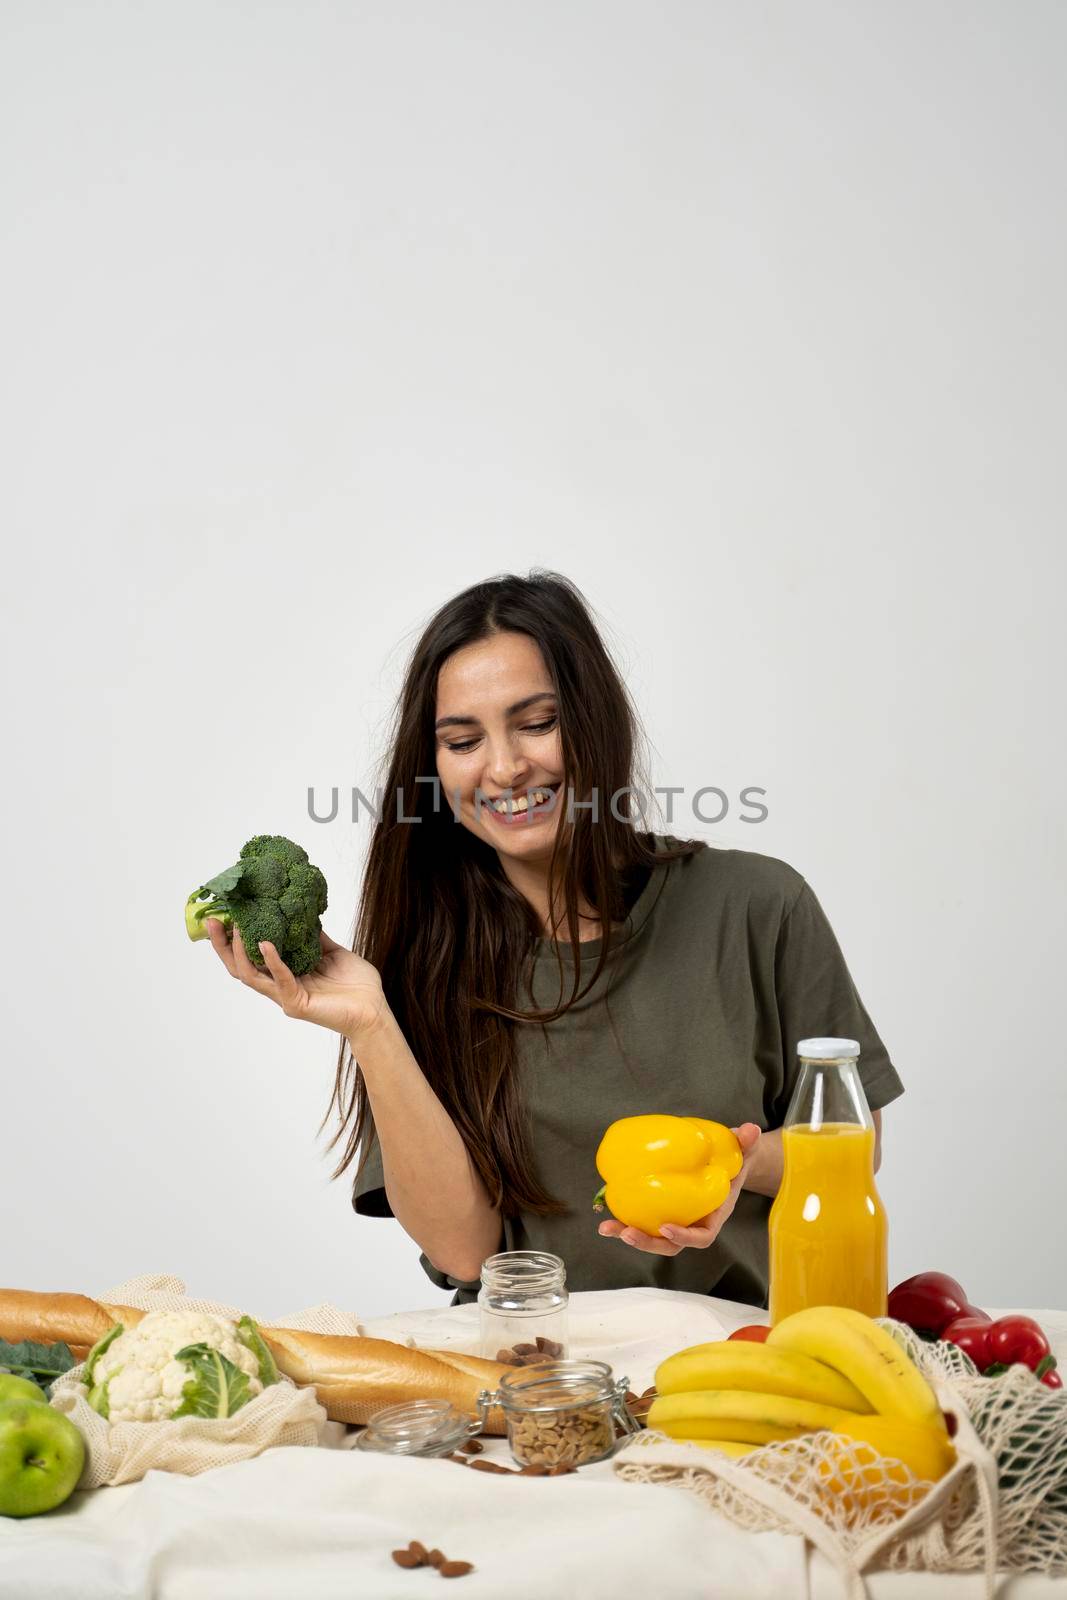 Happy woman in green t-shirt unpacking shopping mesh eco bag with healthy vegan vegetables, fruits, bread, snacks and holding broccoli and yellow pepper in a hands. Healthy eating vegetarian concept. by vovsht